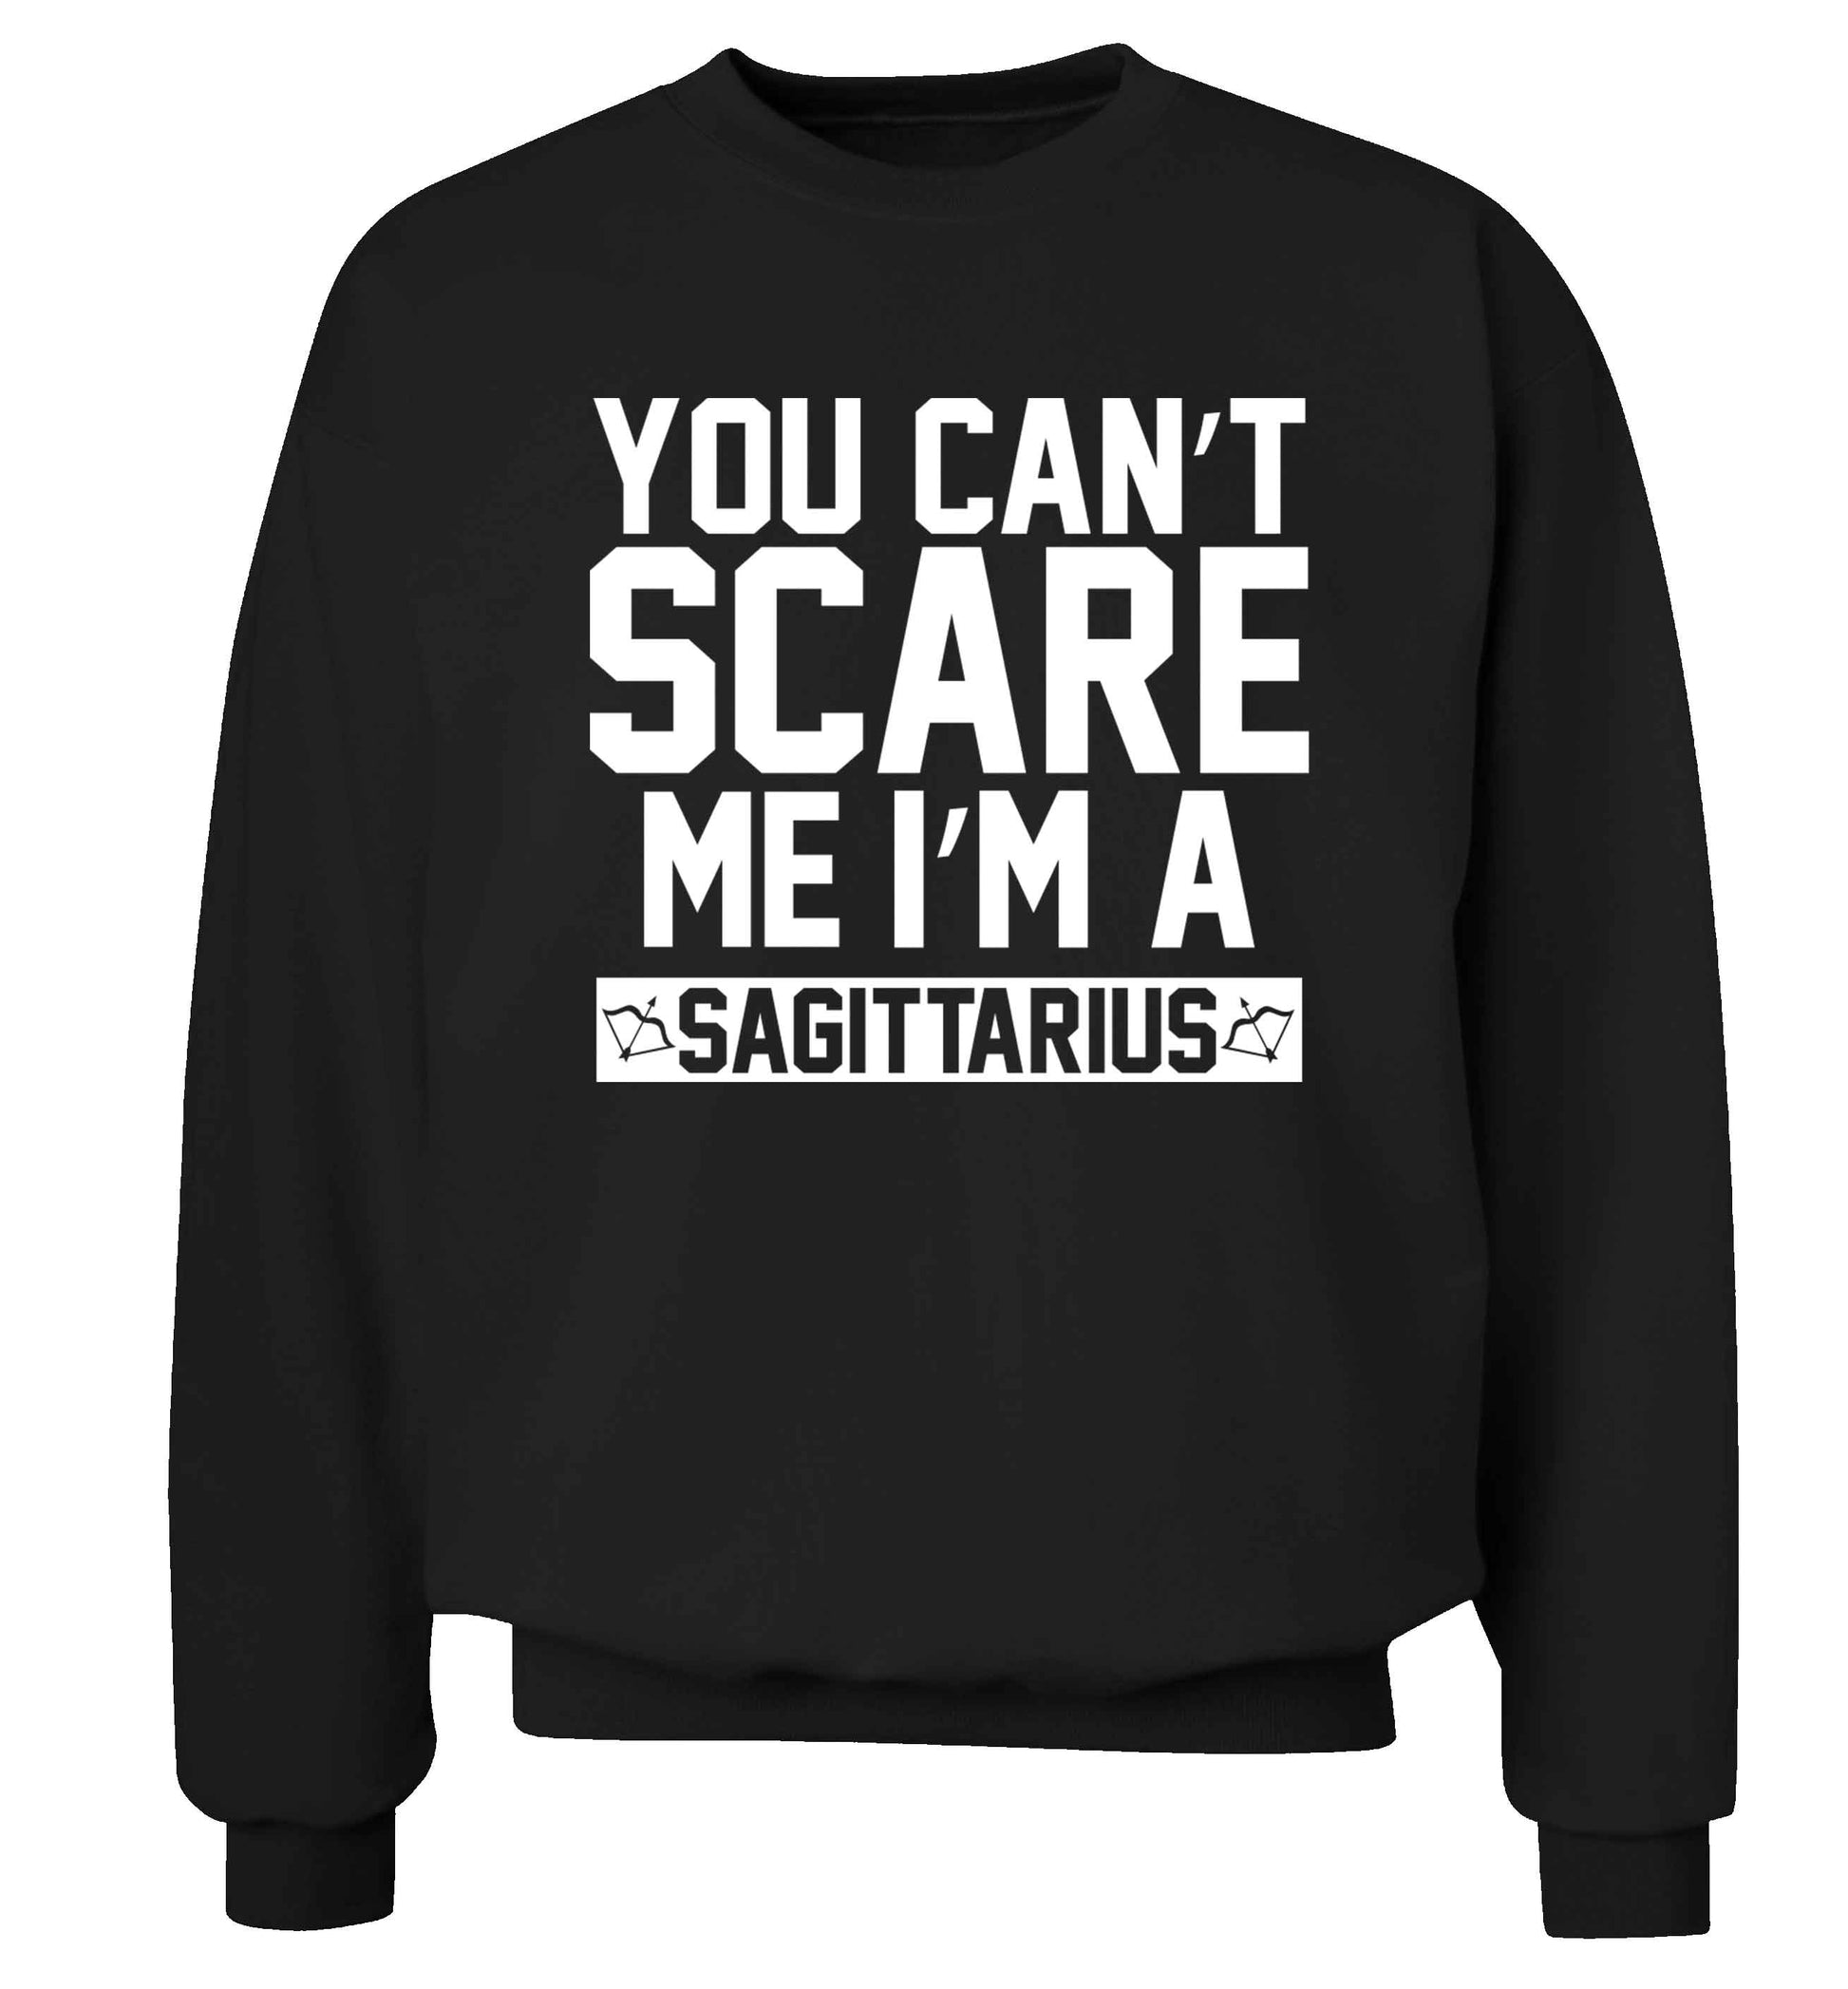 You can't scare me I'm a sagittarius Adult's unisex black Sweater 2XL